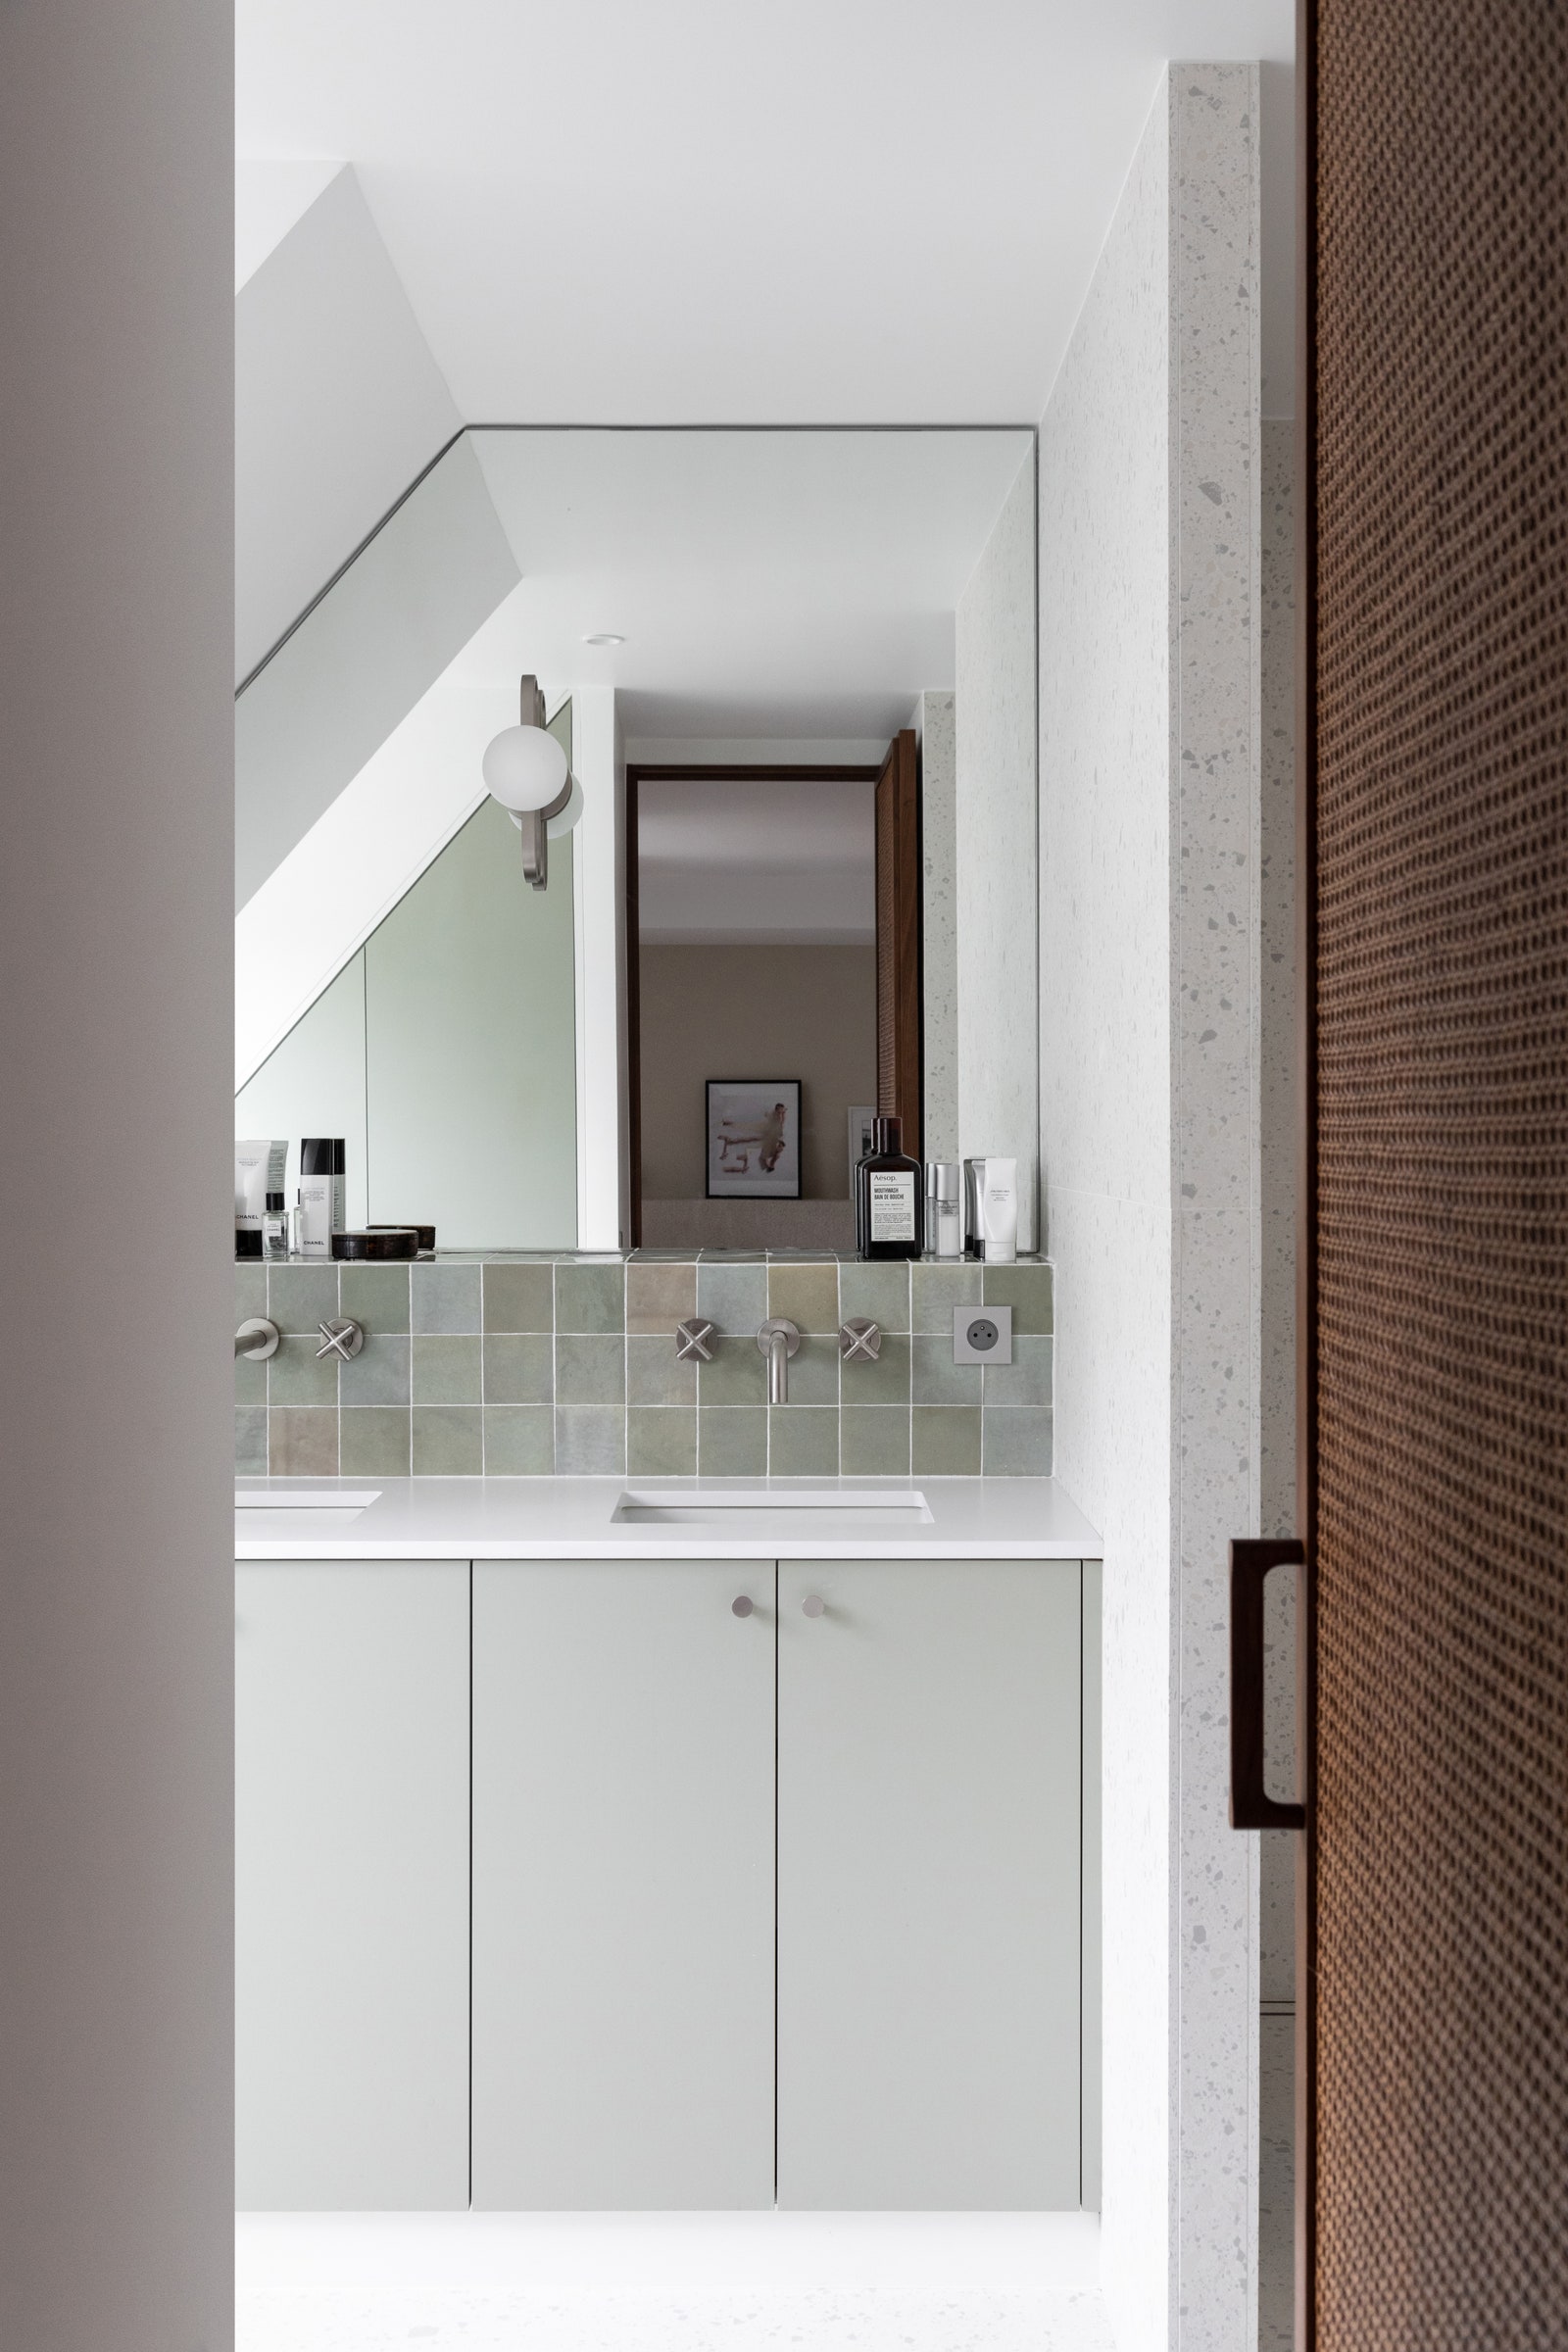 The reed door contrasts with the large terrazzo-style tiles and imitation ceramic tiles...